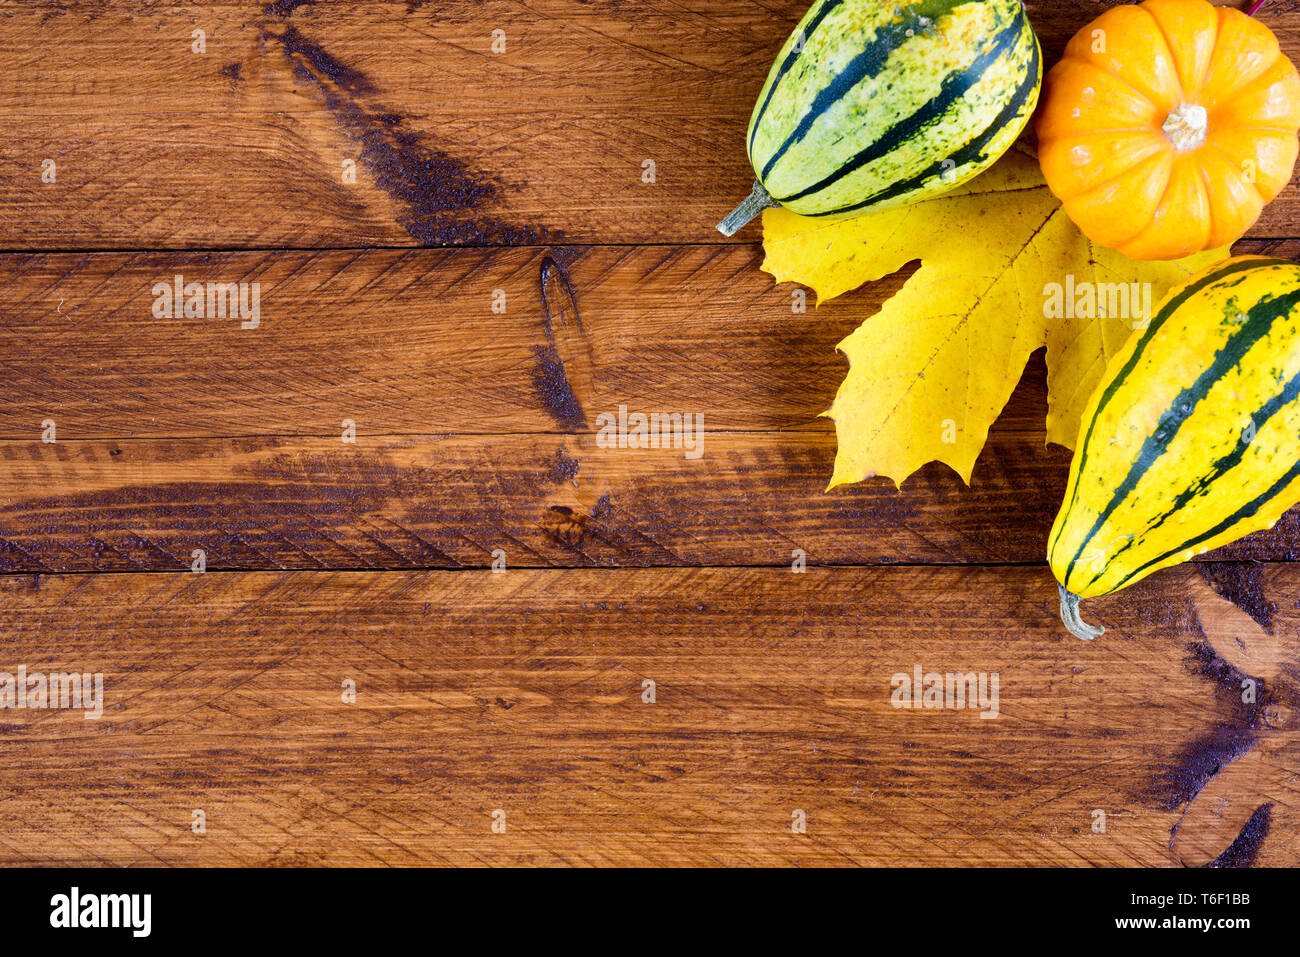 Autumn decoration with pumpkin and leaves Stock Photo